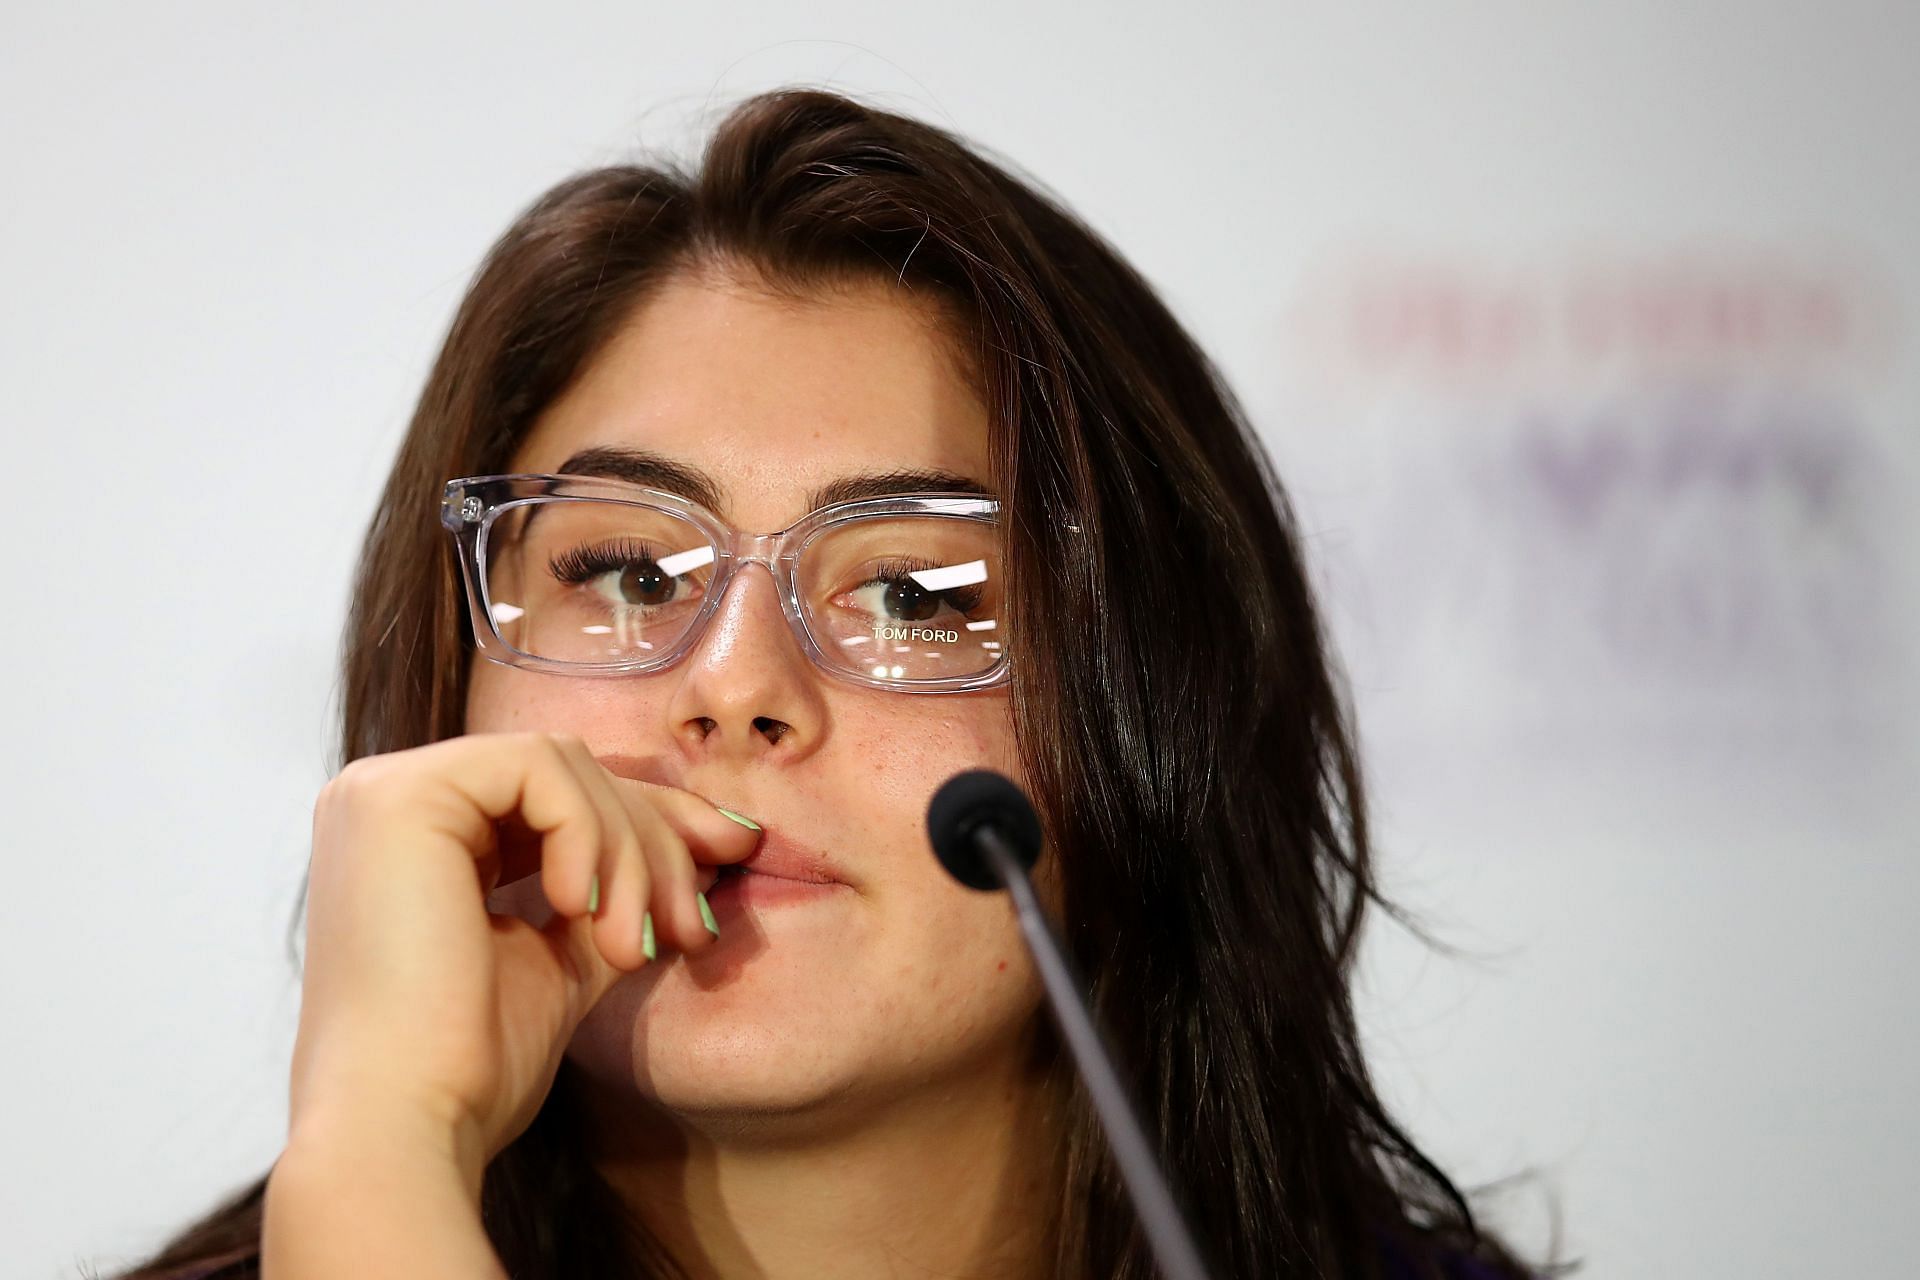 Bianca Andreescu at the 2019 WTA Final press conference